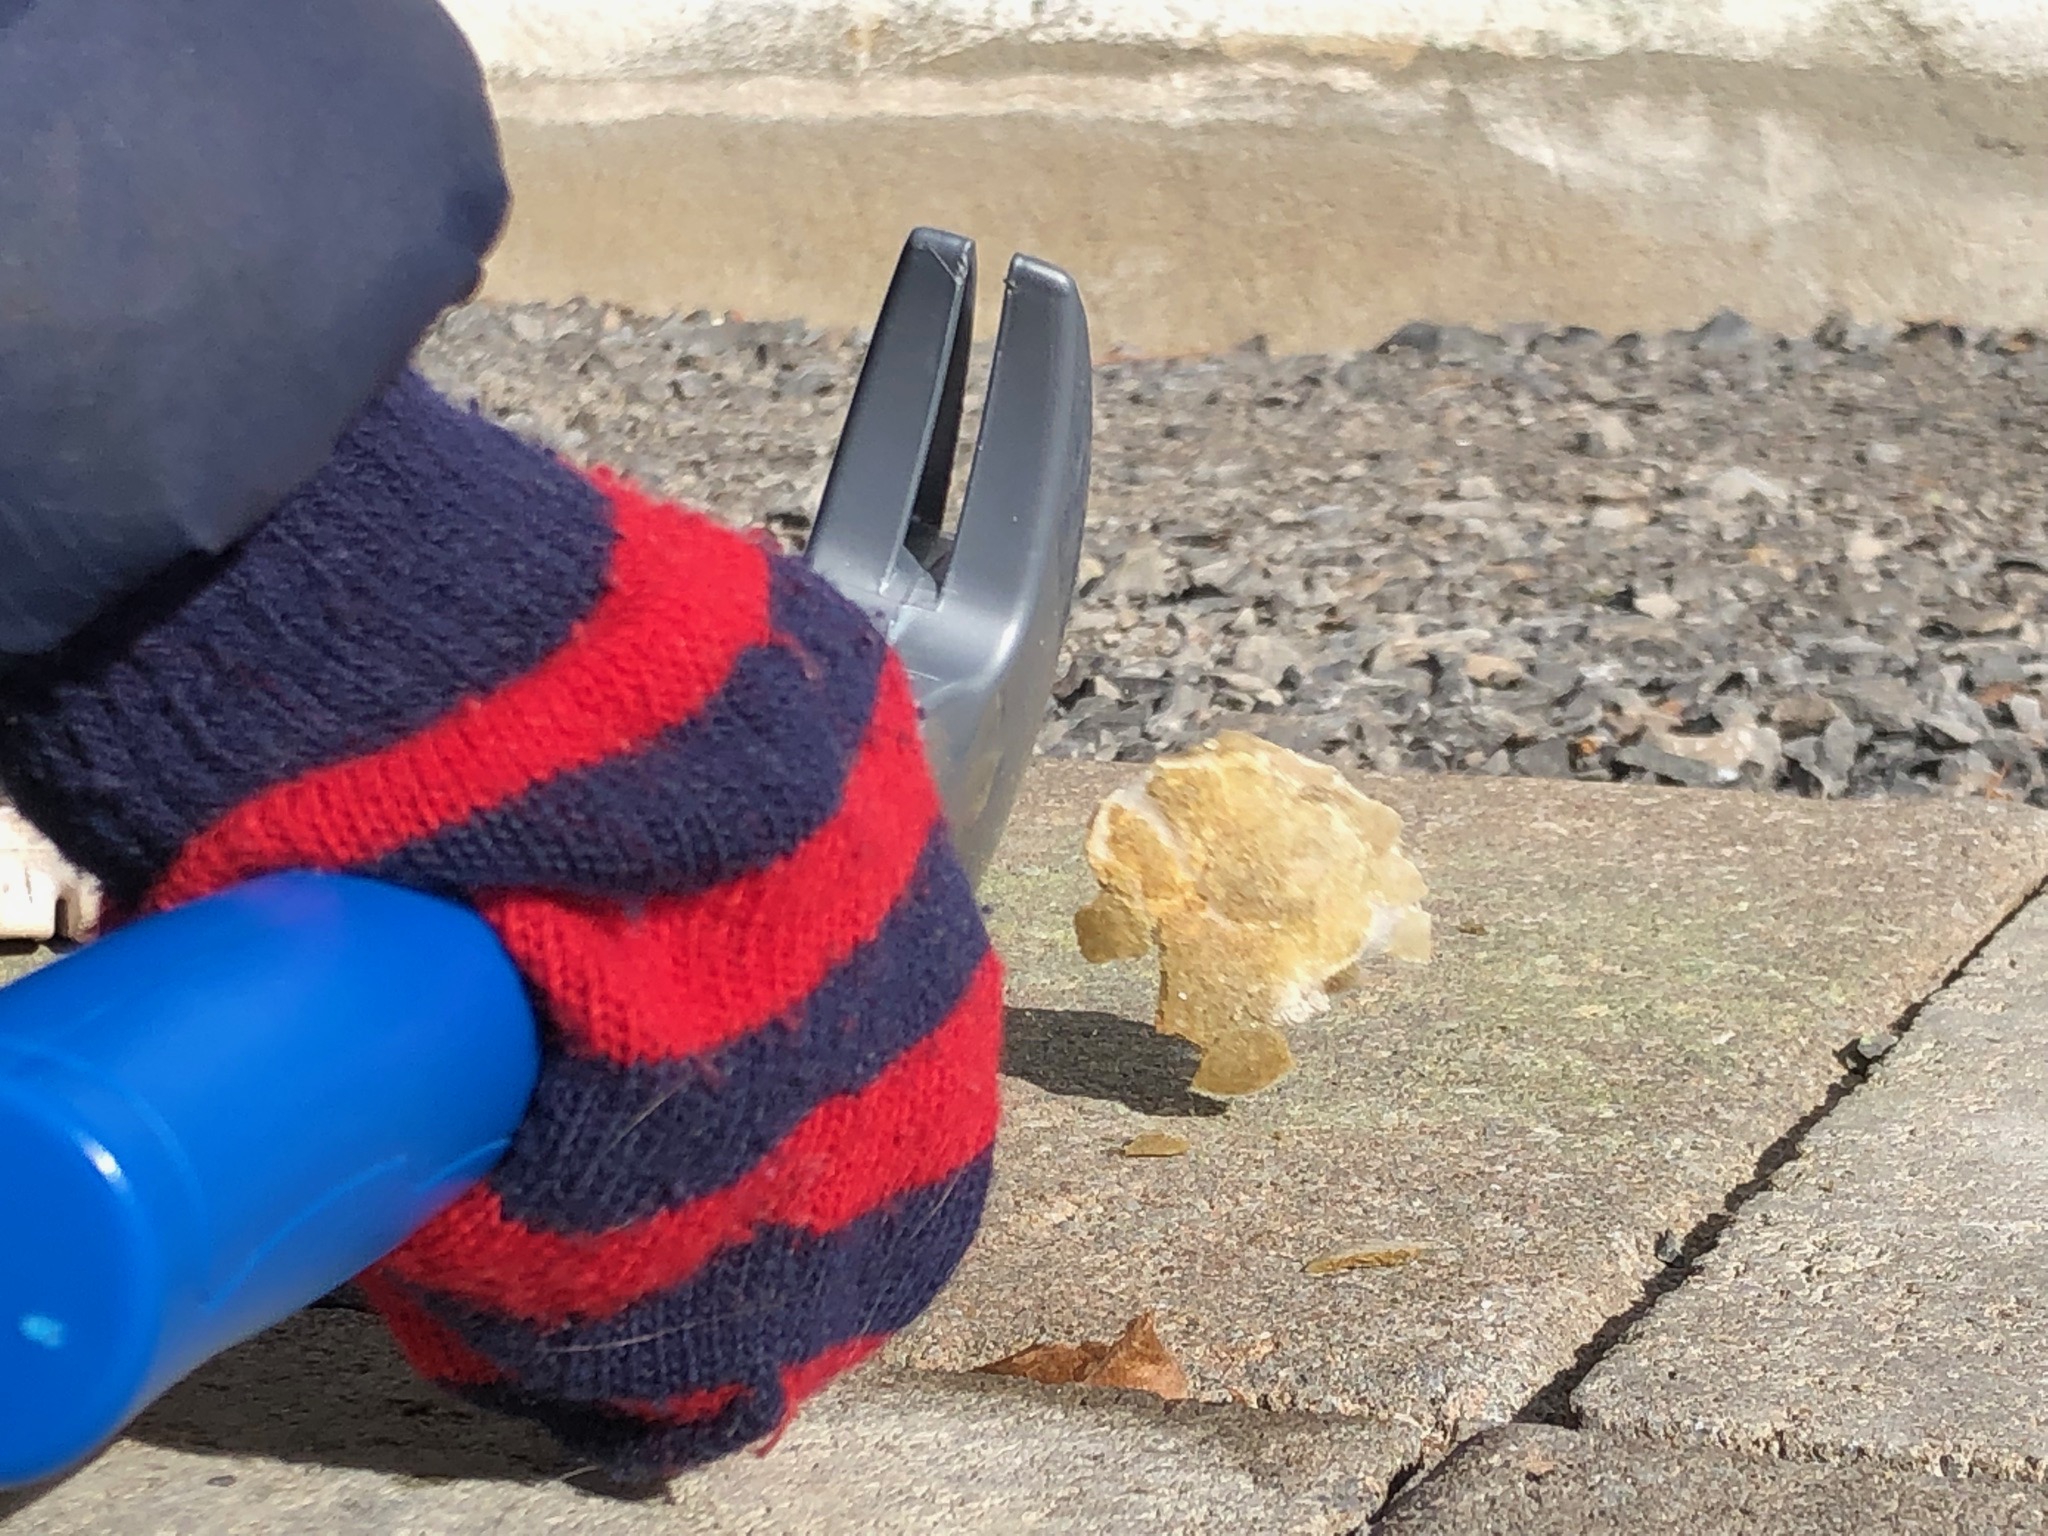 A child's hand wearing a striped red and navy gloves holds a blue and grey plastic hammer. A fabricated moon rock is seen next to it, in motion, after being smashed